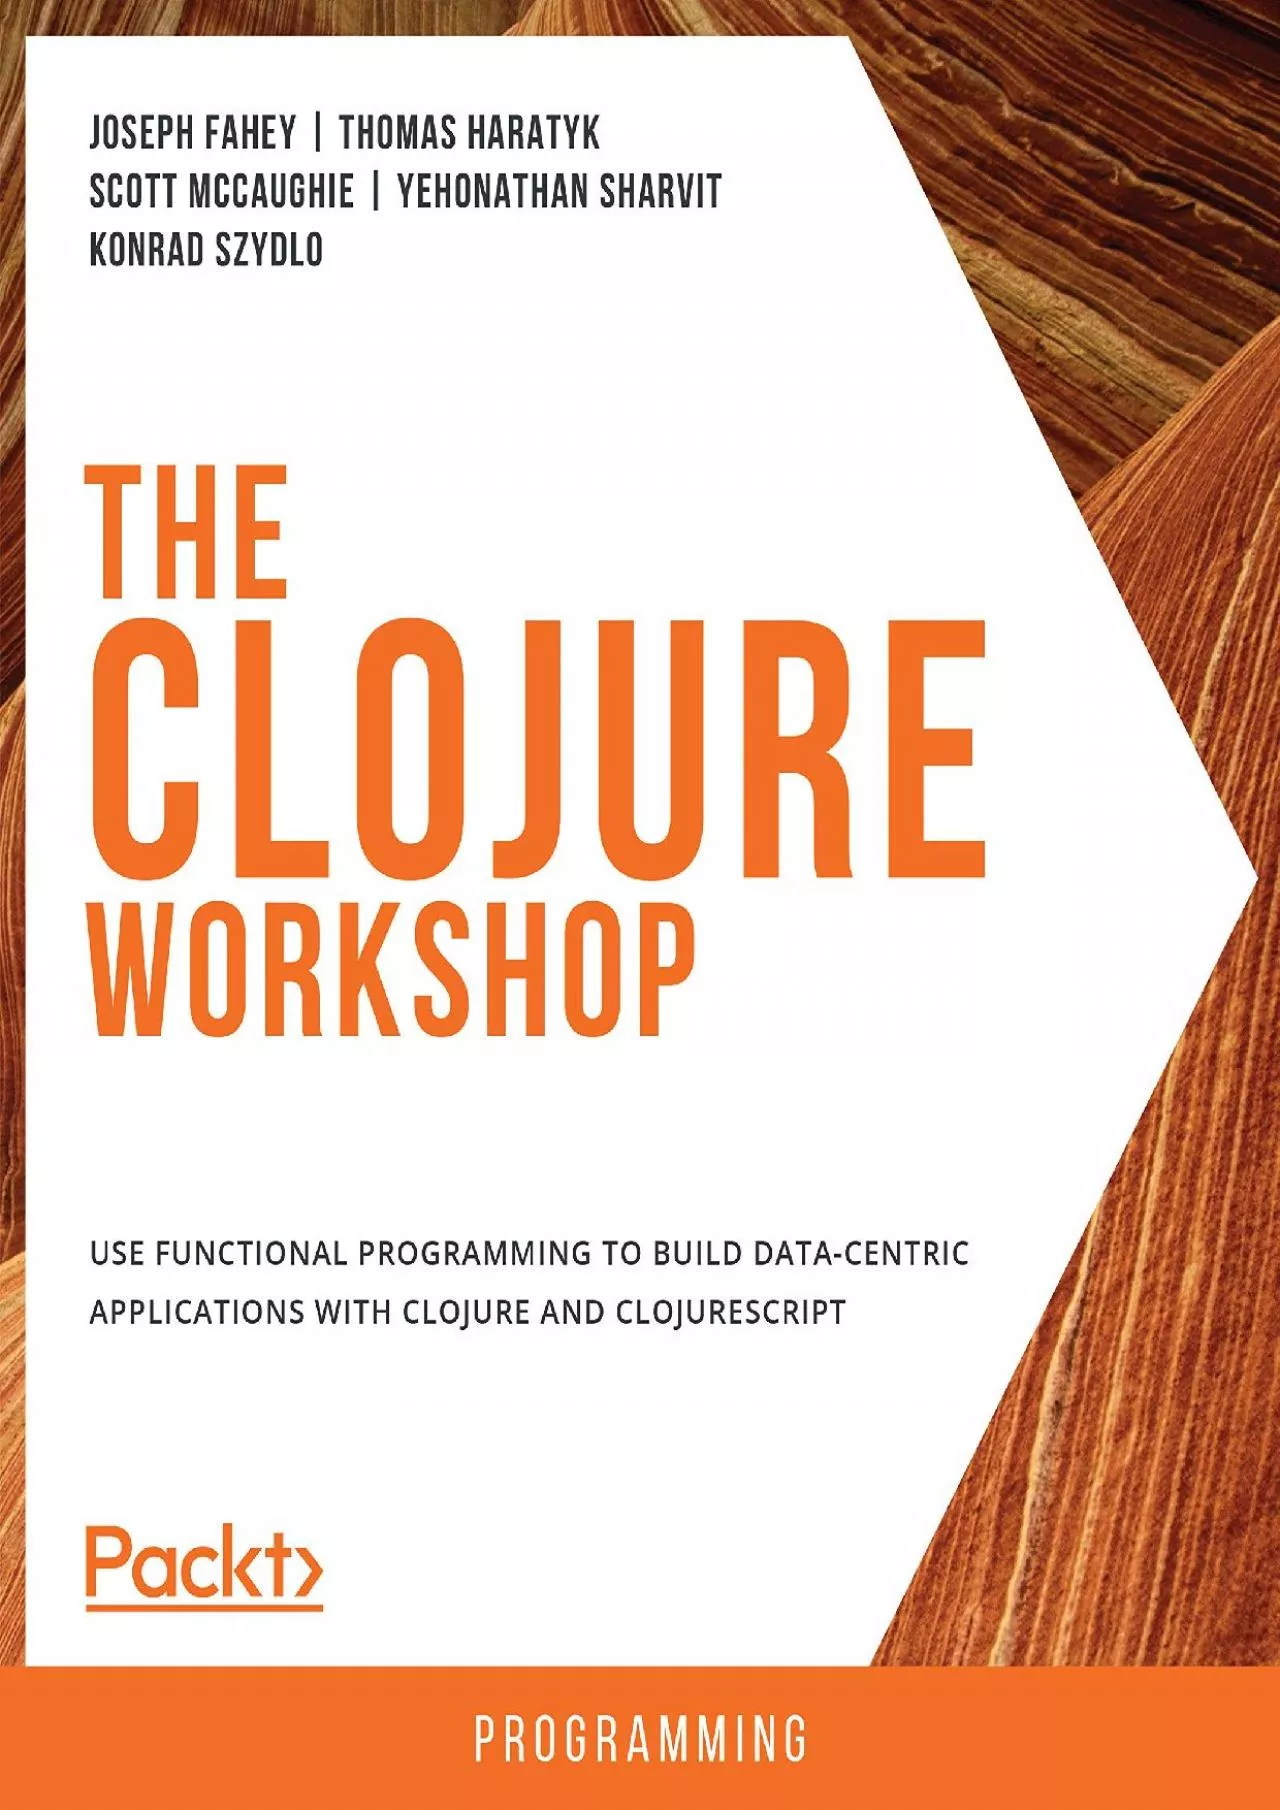 [BEST]-The Clojure Workshop Use functional programming to build data-centric applications